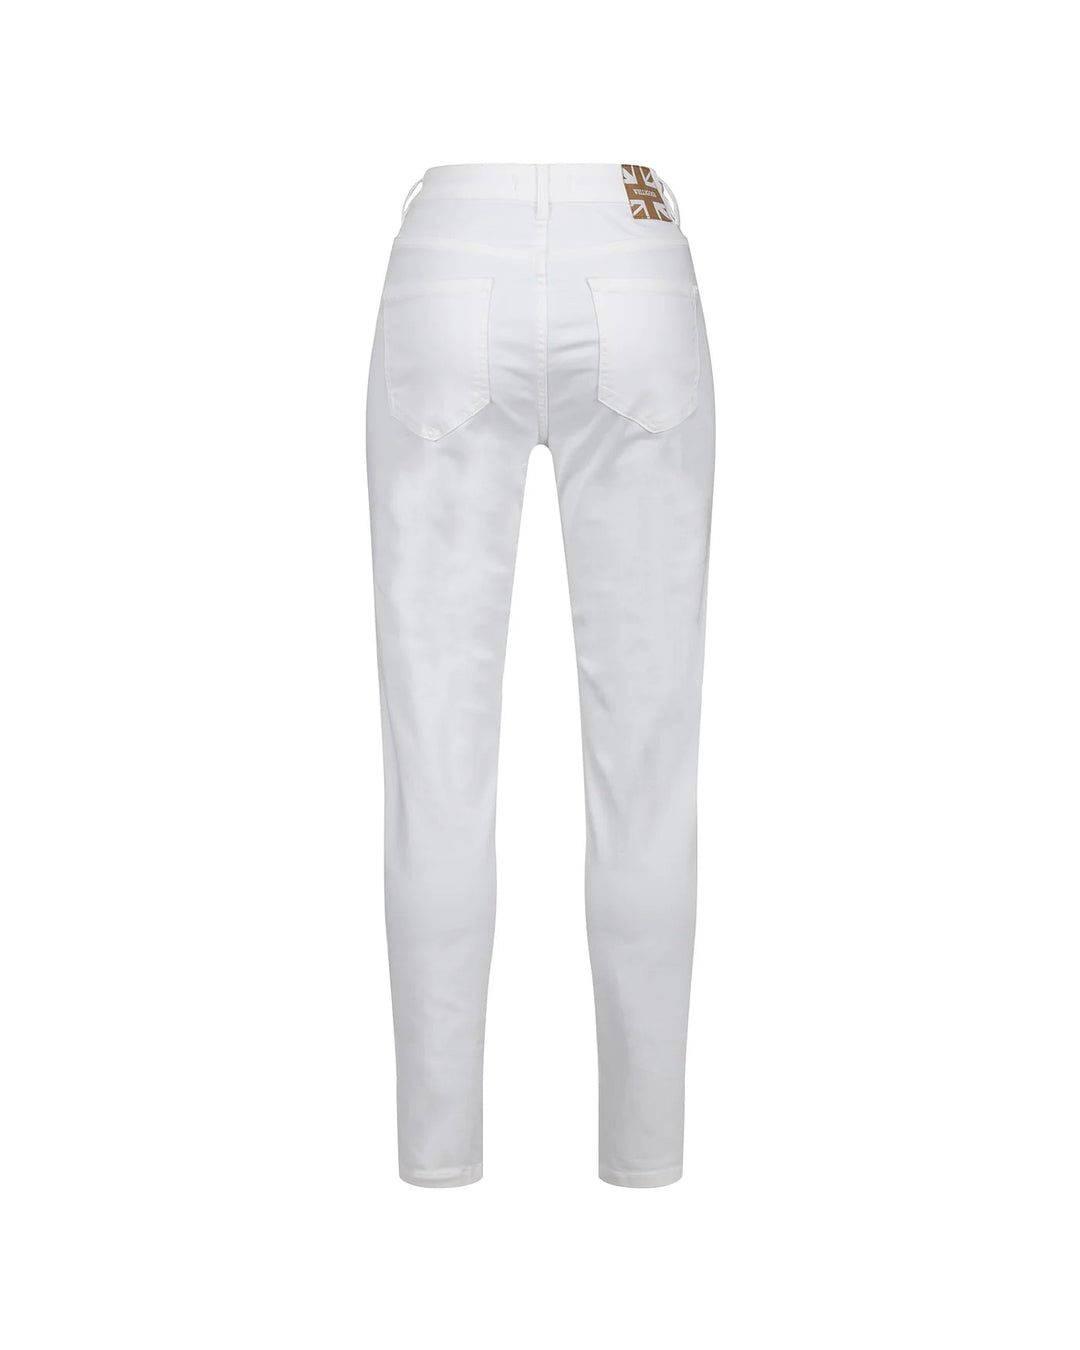 Our high waisted women's jeans will be a constant go to. A classic basic that can be paired with almost any look. The stretch cotton provides freedom of movement whilst the high waisted style elongates the leg. Extra comfortable in a straight leg style with our signature WG flag at the back. These come up on the roomier side so if you are in between sizes, we recommend going down.